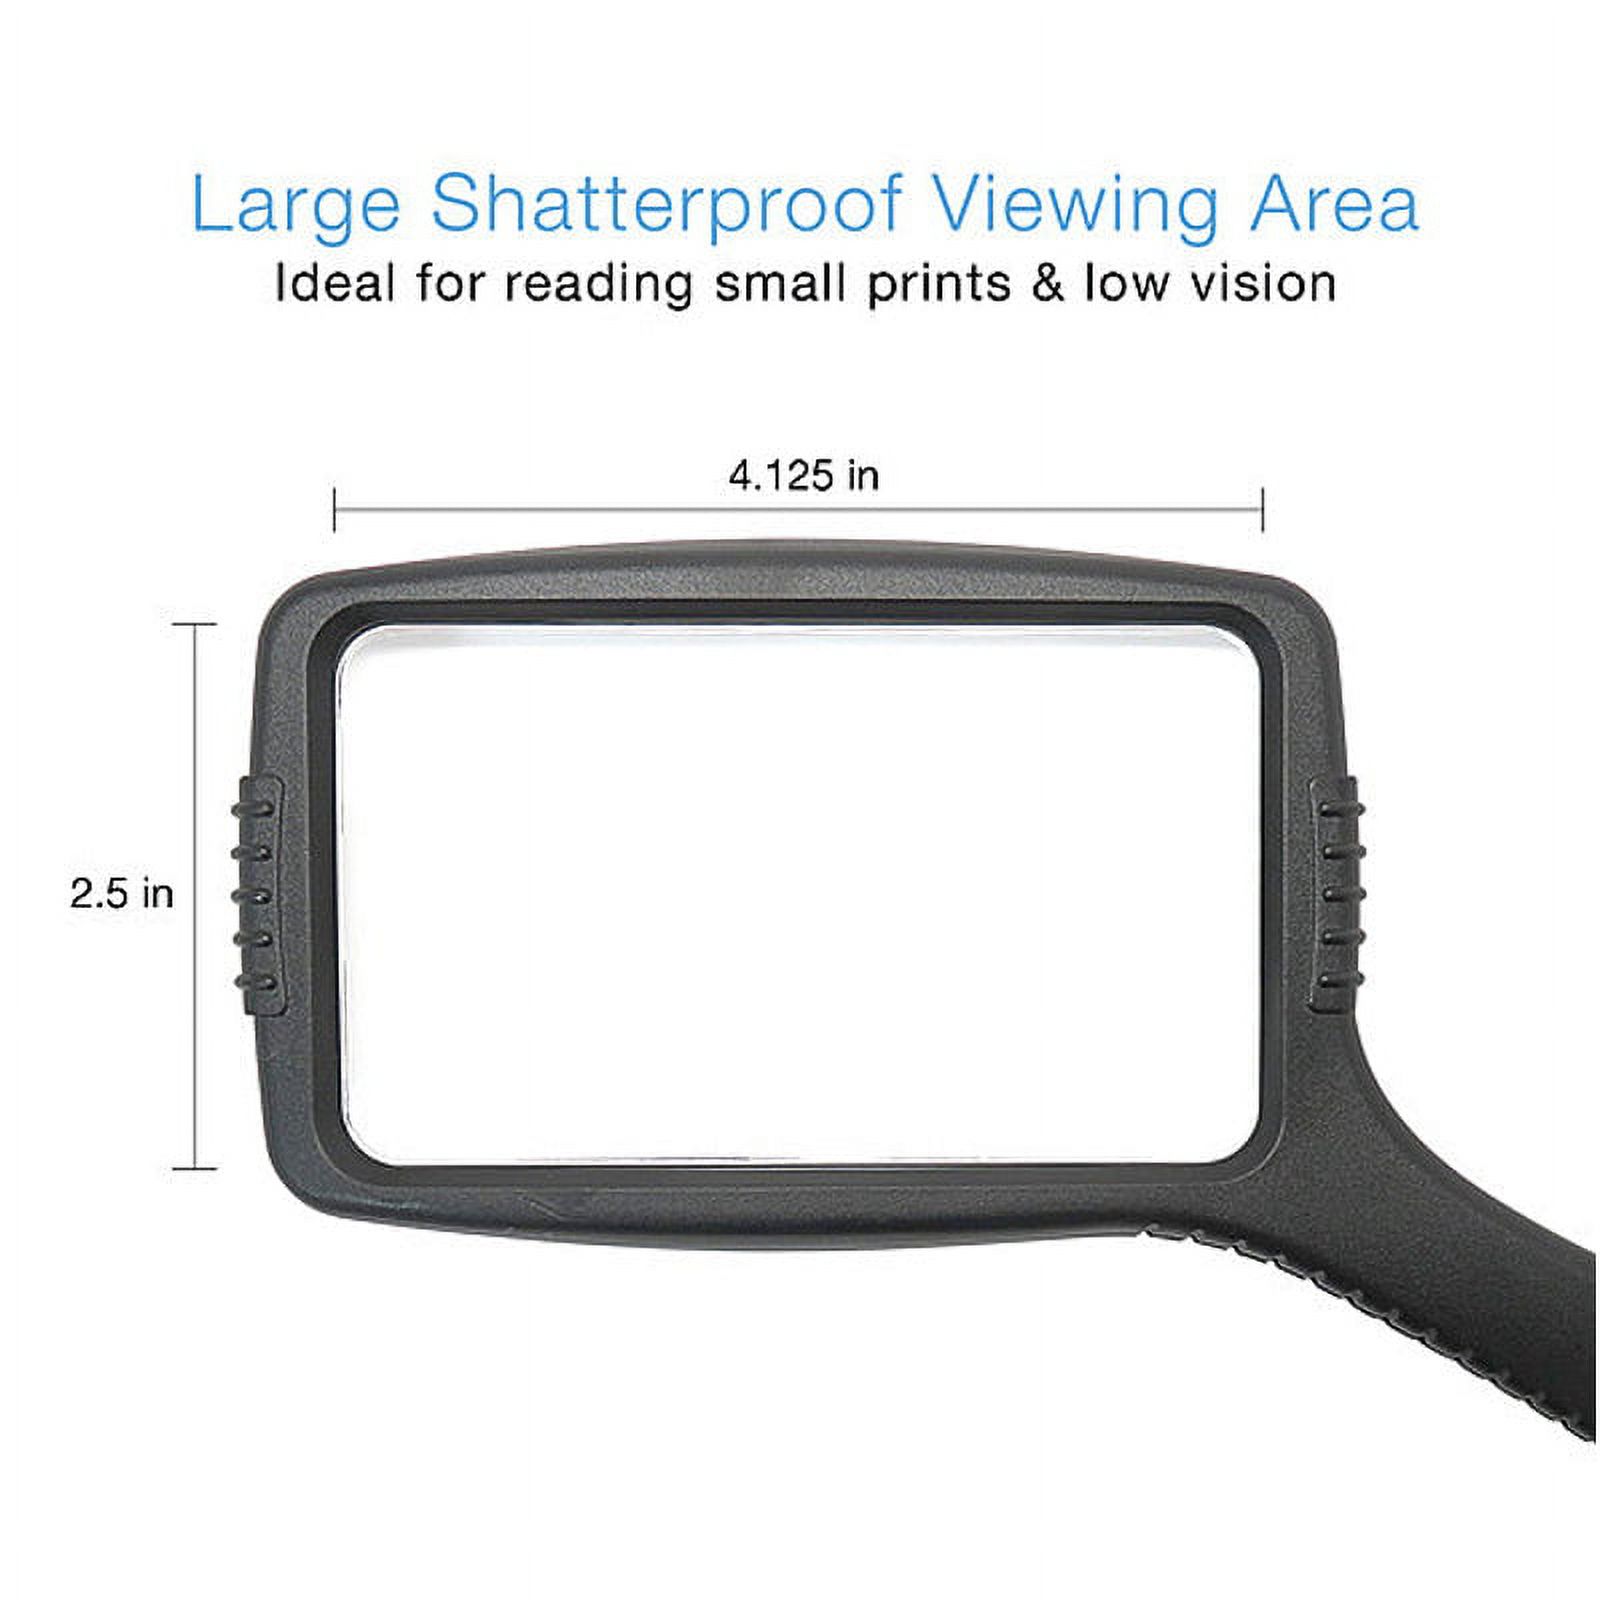 MagniPros 3X(300%) Magnifying Glass-Large Rectangular Viewing Area-Shatterproof - image 2 of 7